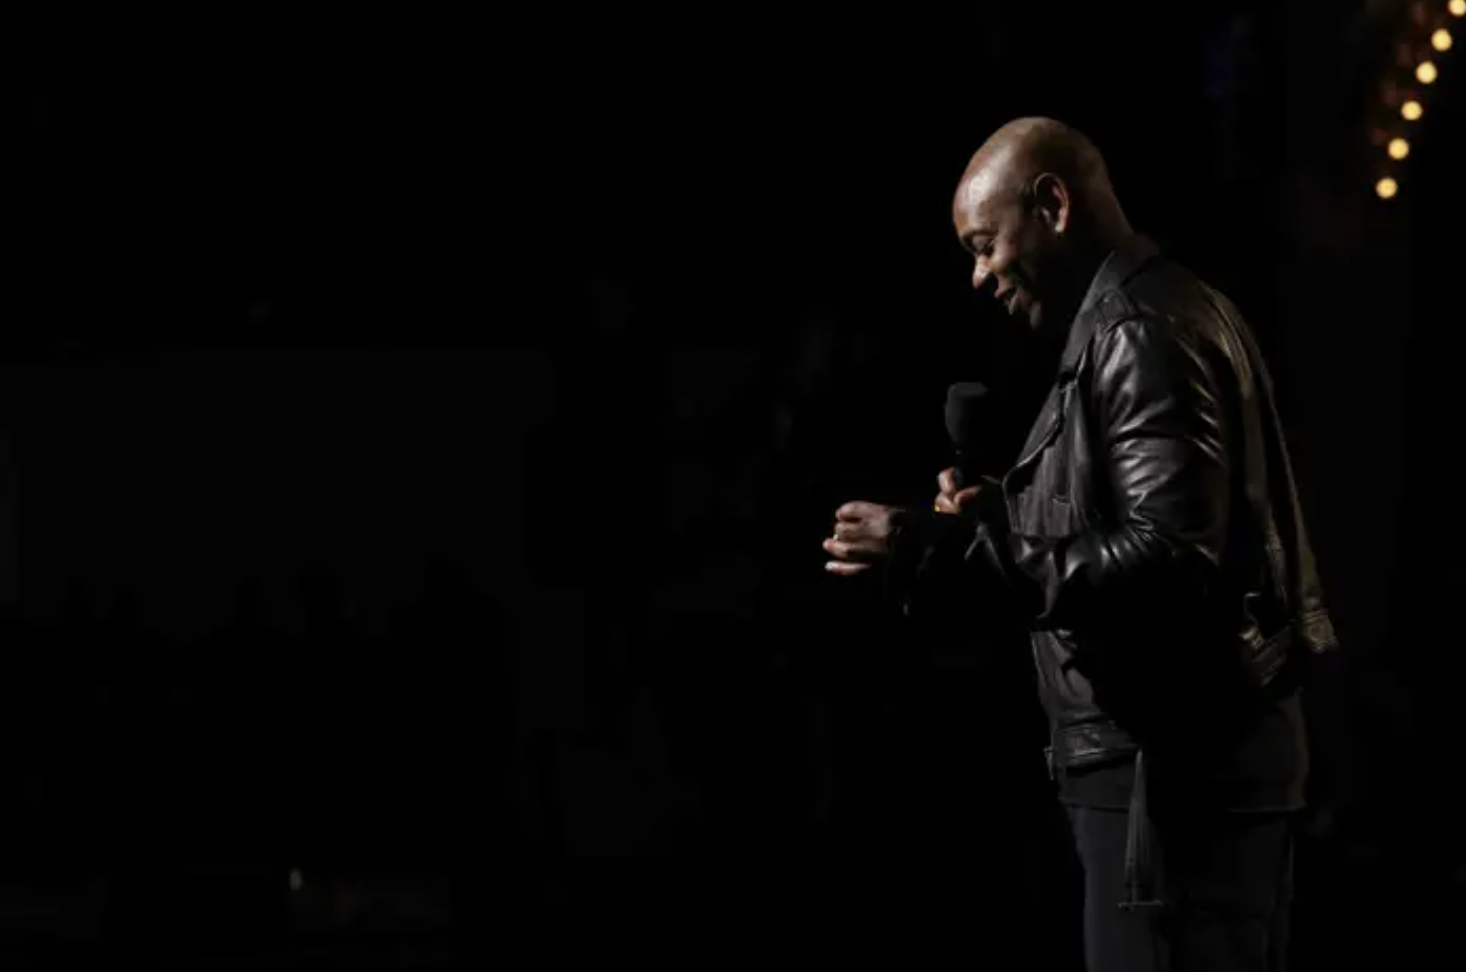 dave chappelle stands in a black leather jacket holding a mic against a pitch black background